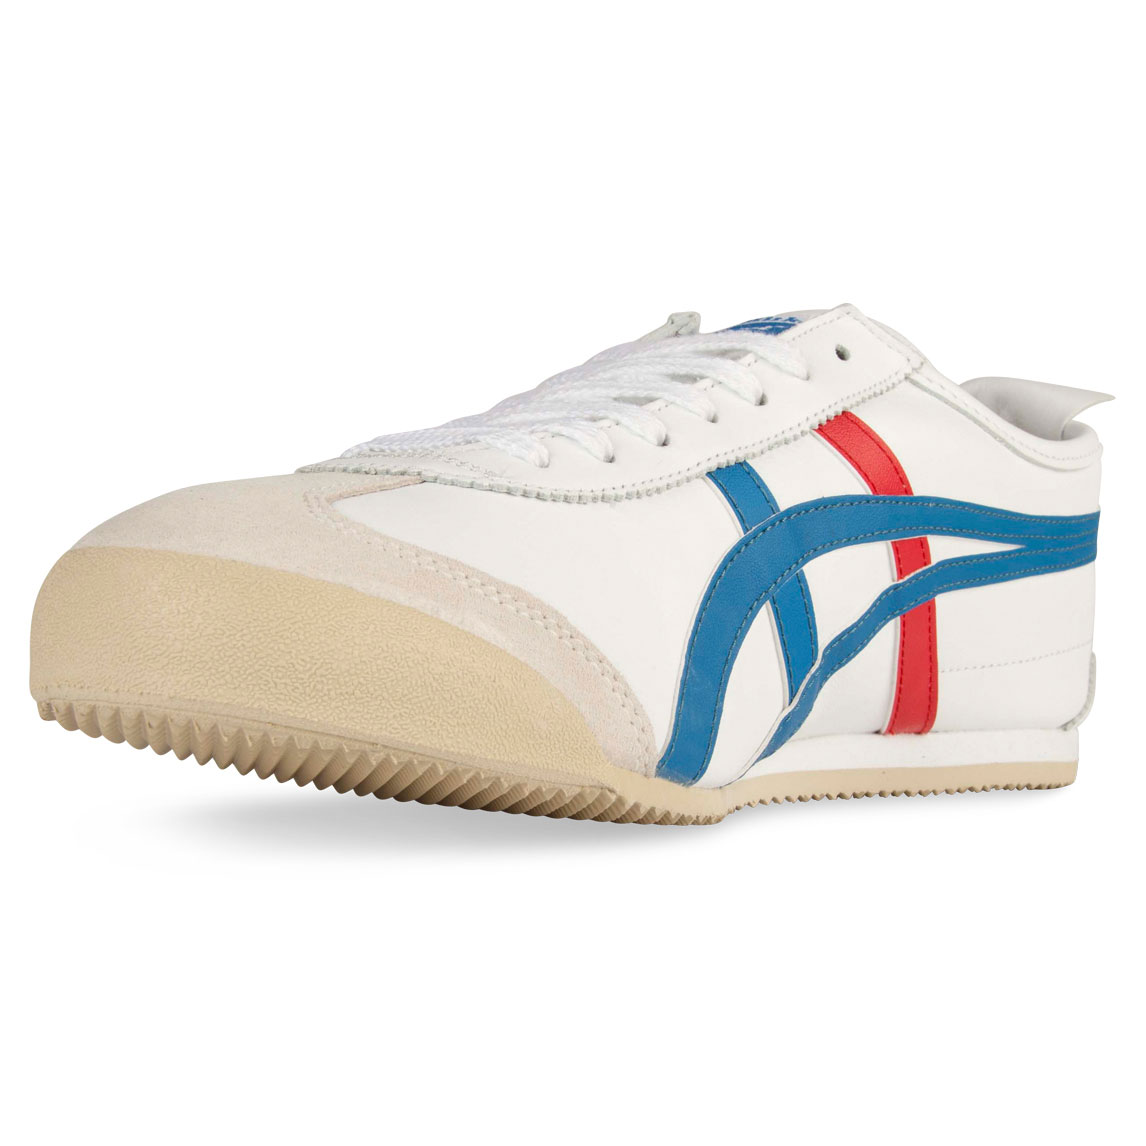 Onitsuka Tiger MEXICO 66 White/Blue/Red | Hype DC